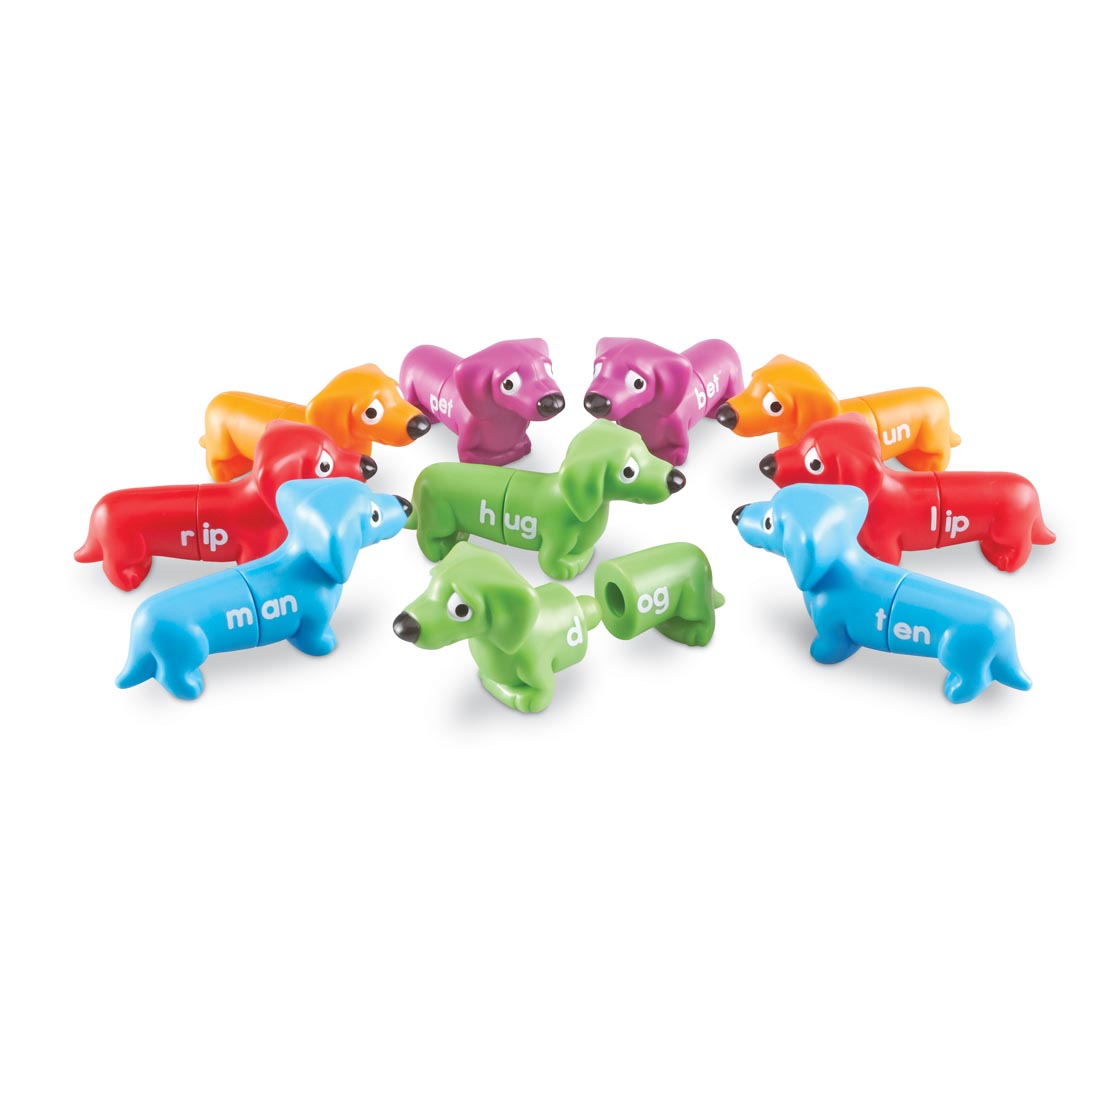 plastic 2-piece weiner dogs that have a beginning consonant on one end and two more letters on the other.